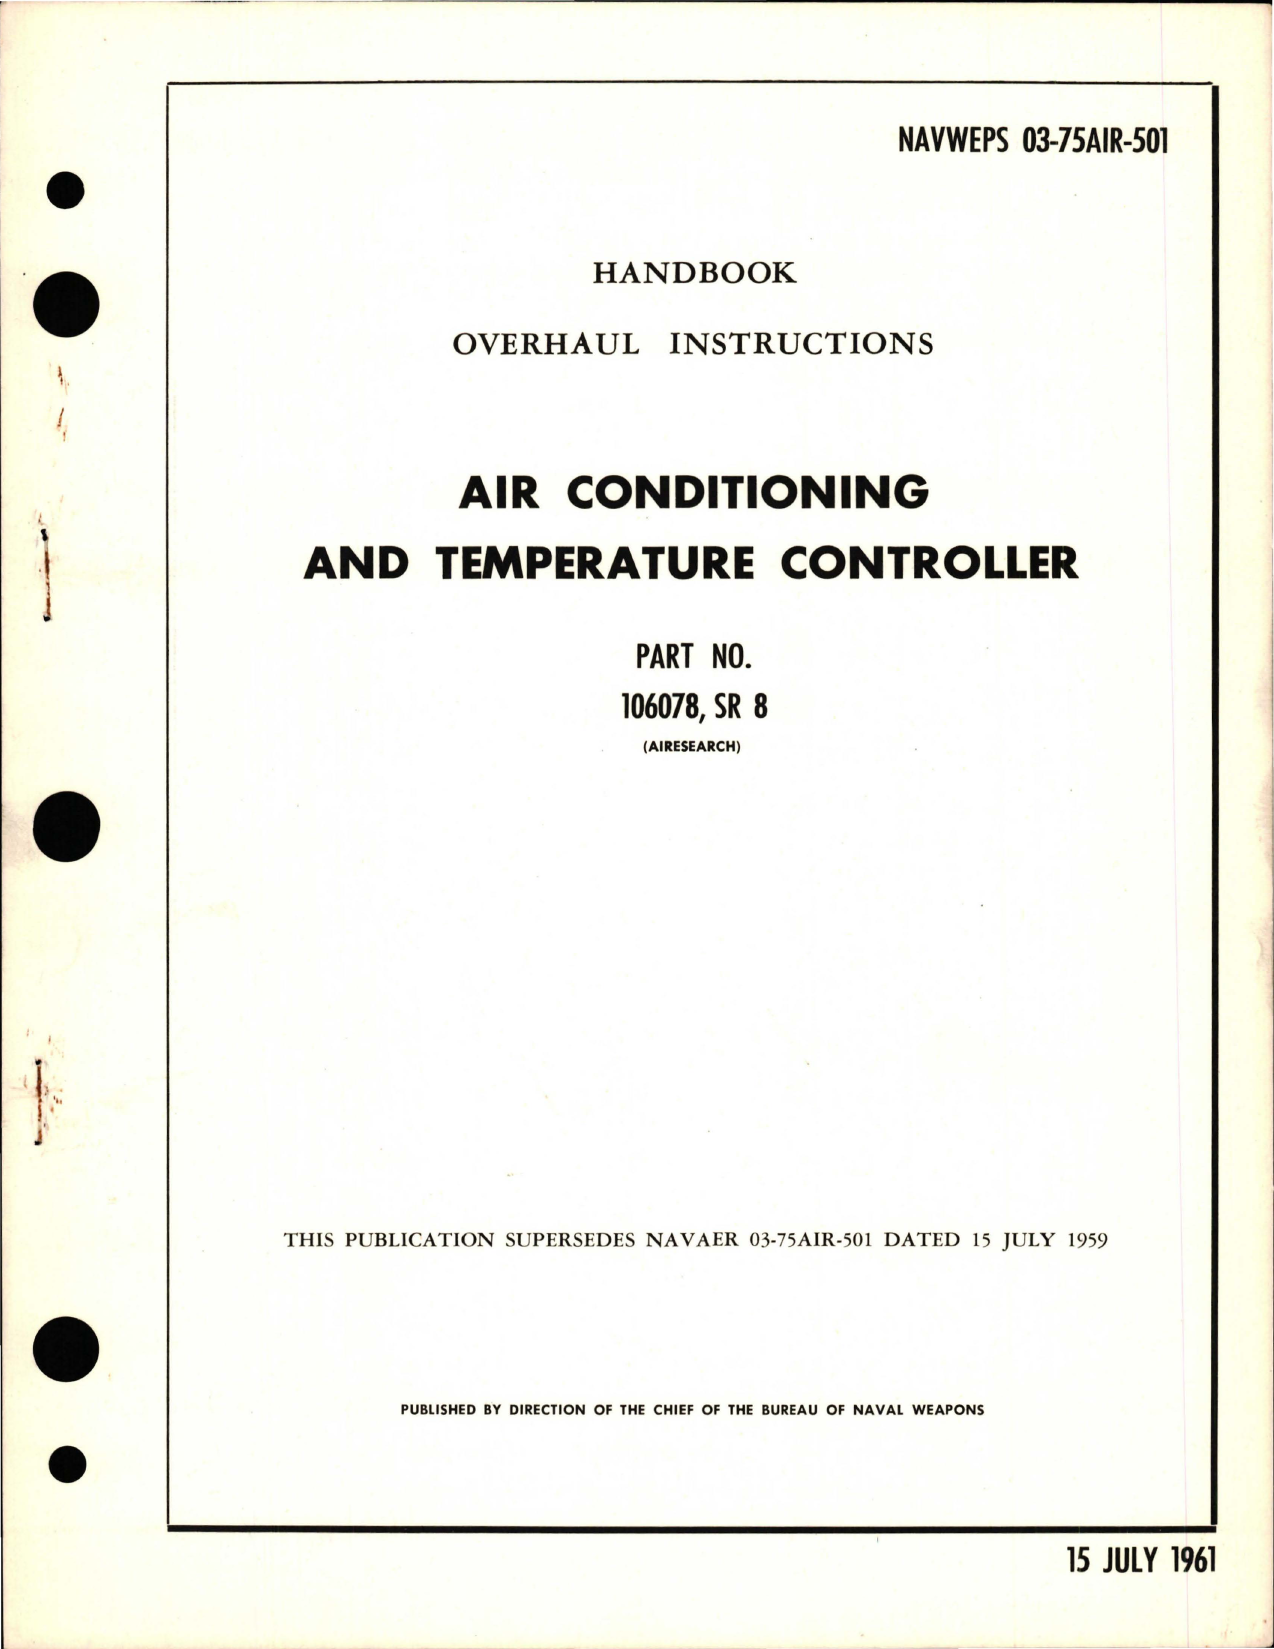 Sample page 1 from AirCorps Library document: Overhaul Instructions for Air Conditioning and Temperature Controller - Part 106078 and SR 8